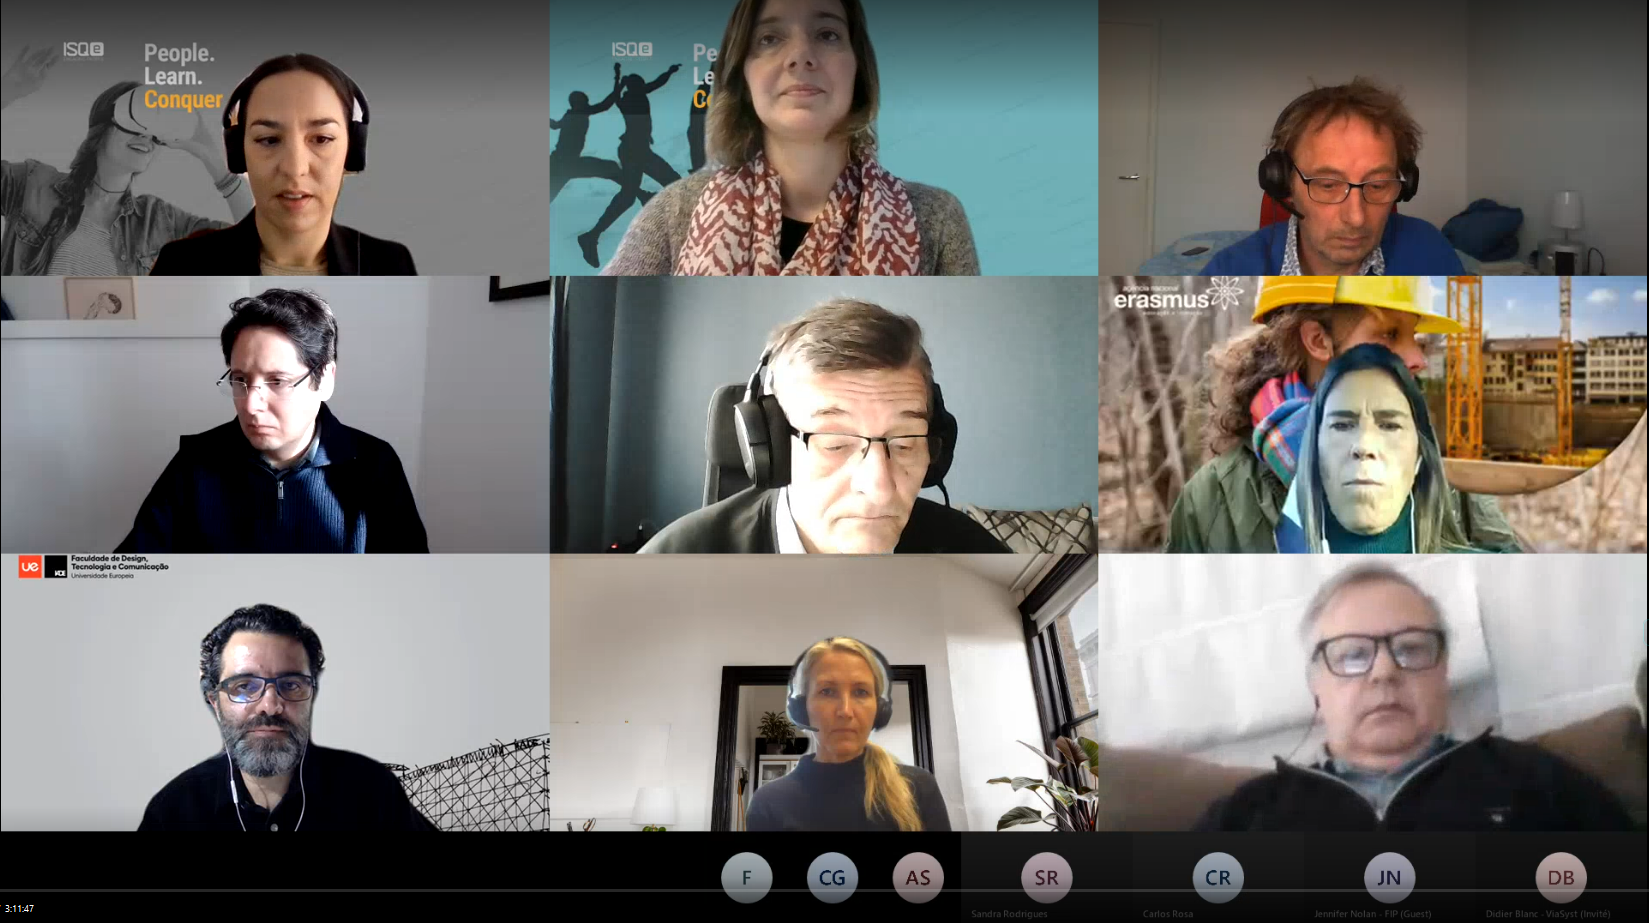 Video call with all the project partners